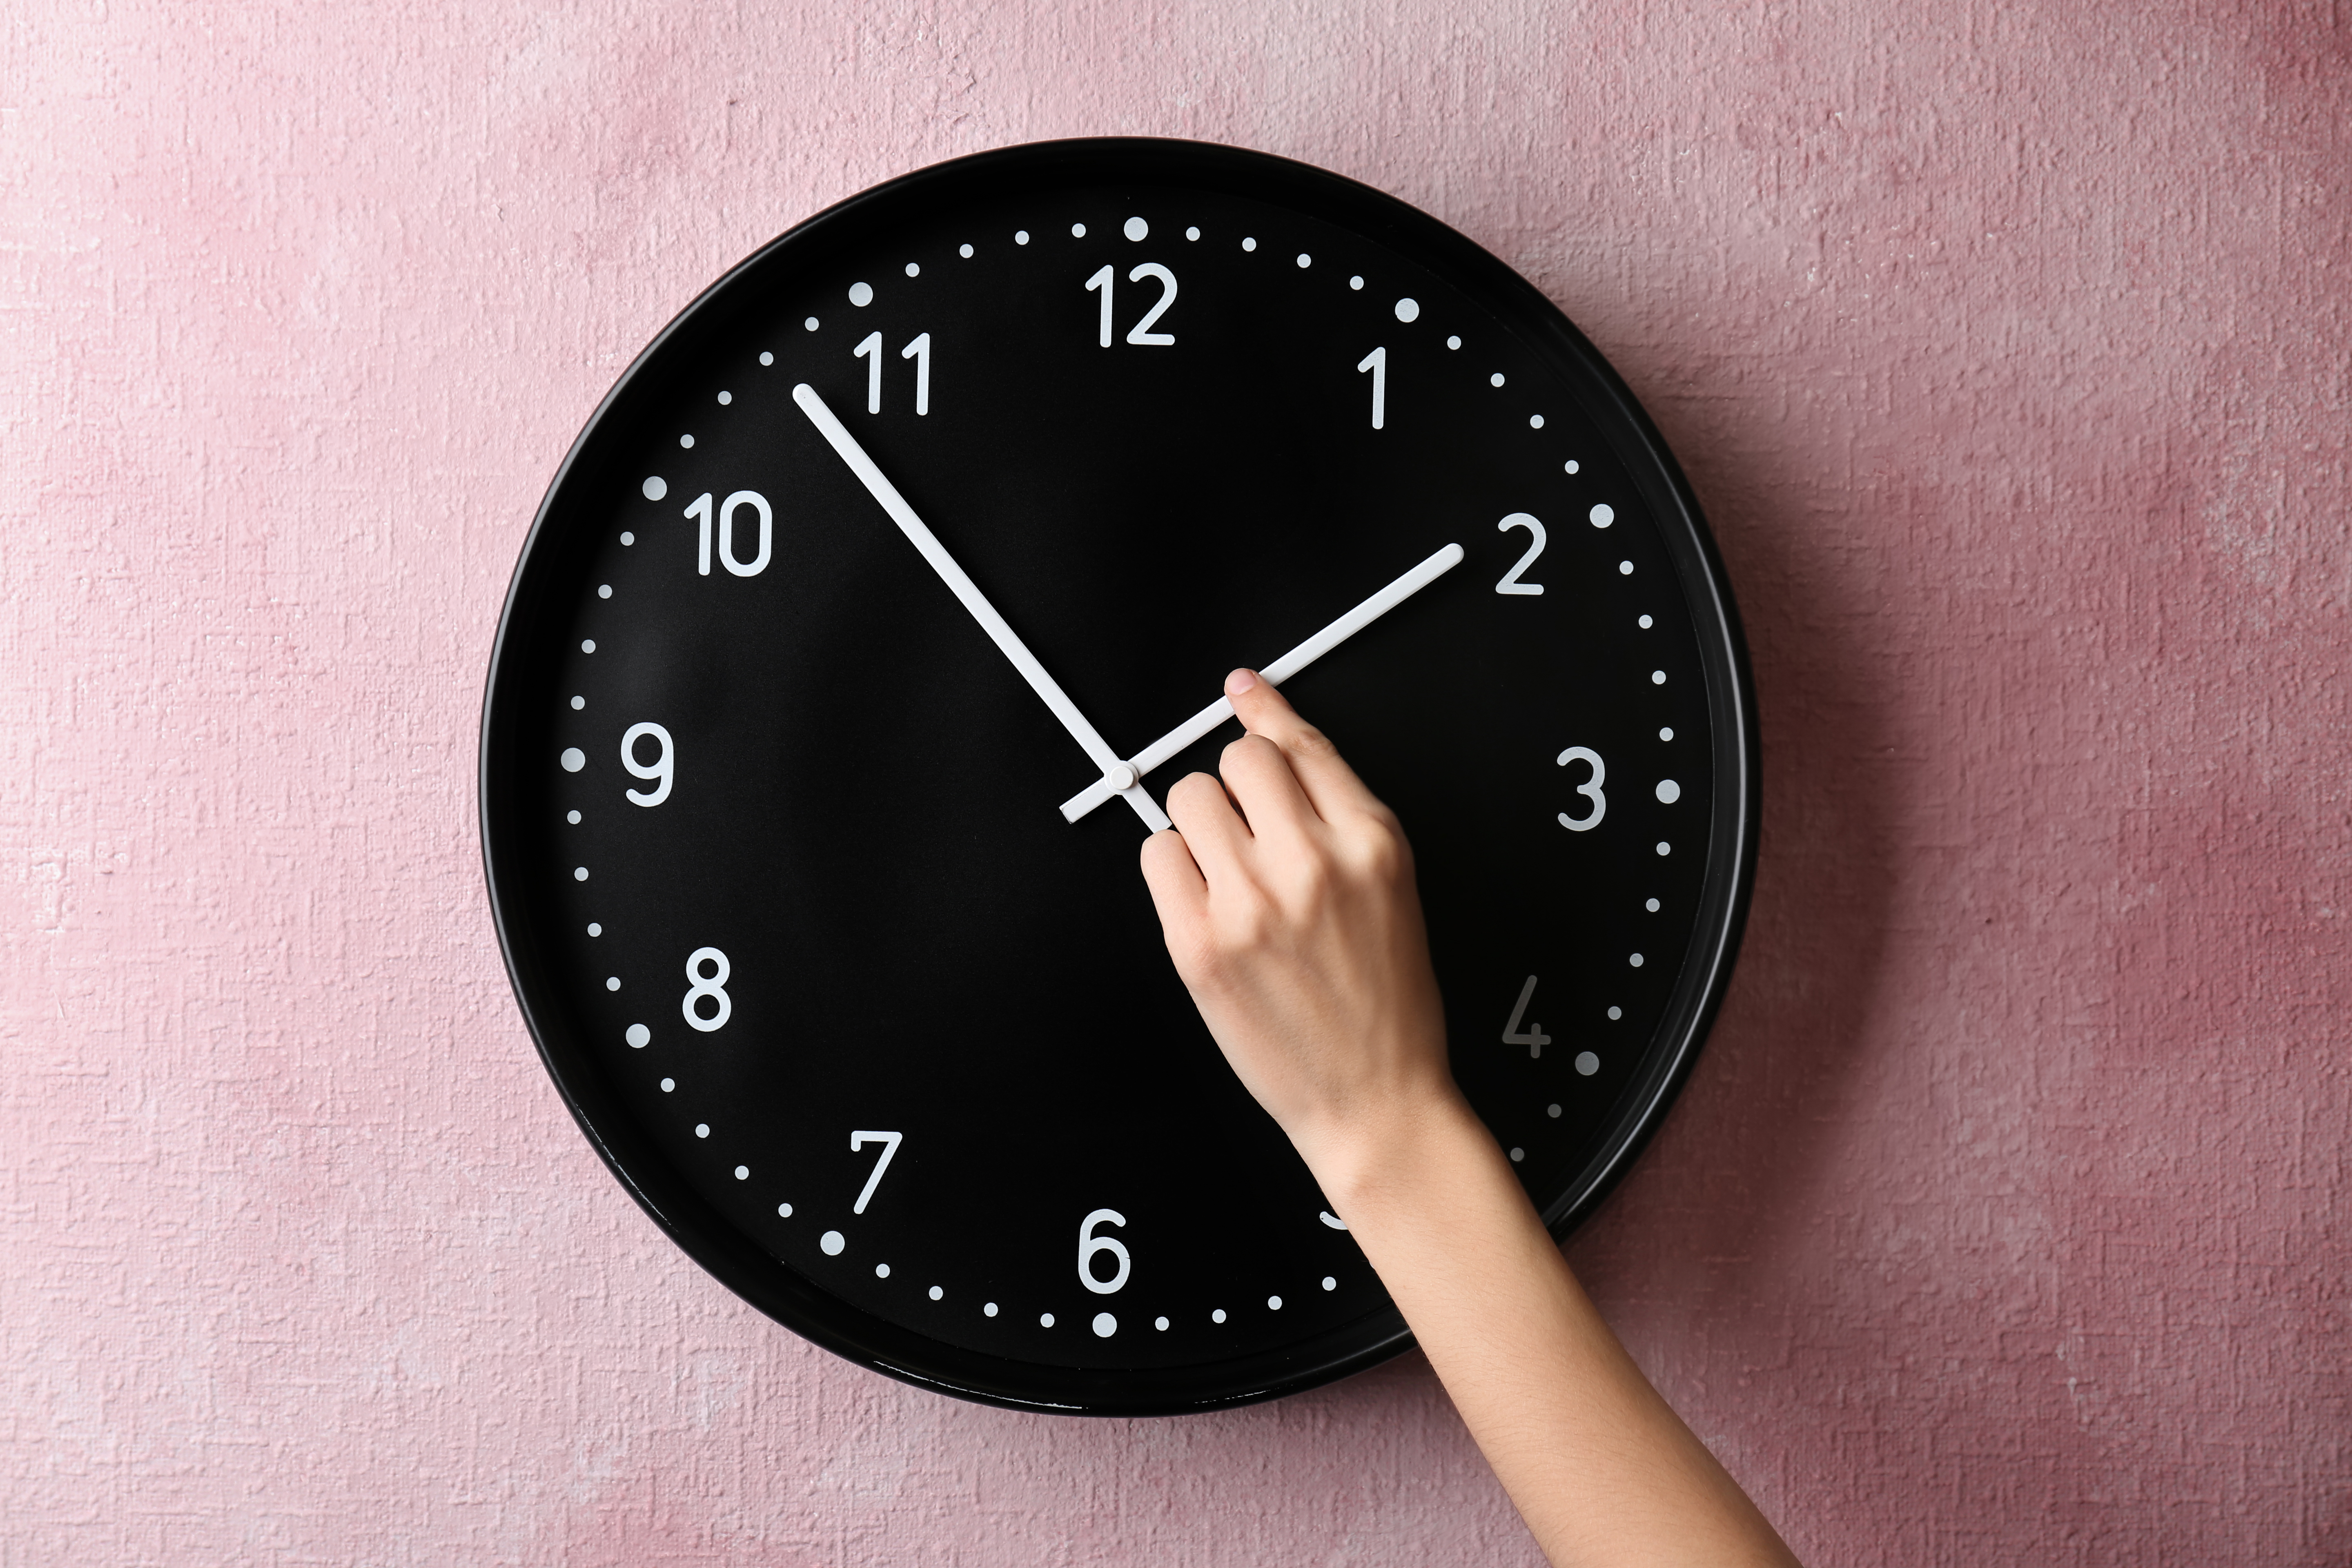 Daylight saving time is back, which means we're due to spring forward